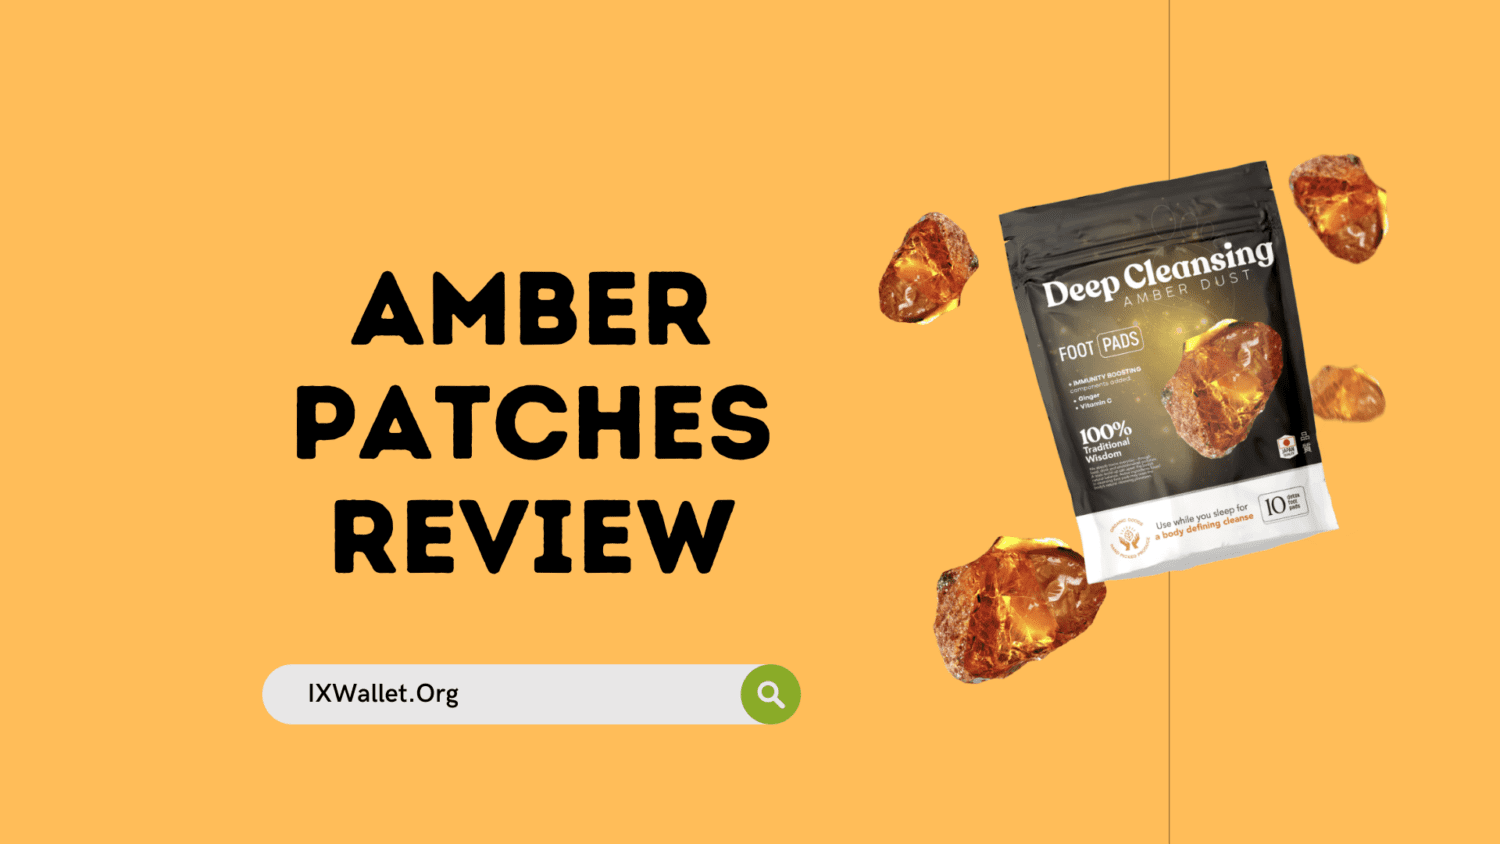 Amber Patches Review: Is It Legit or Hoax?